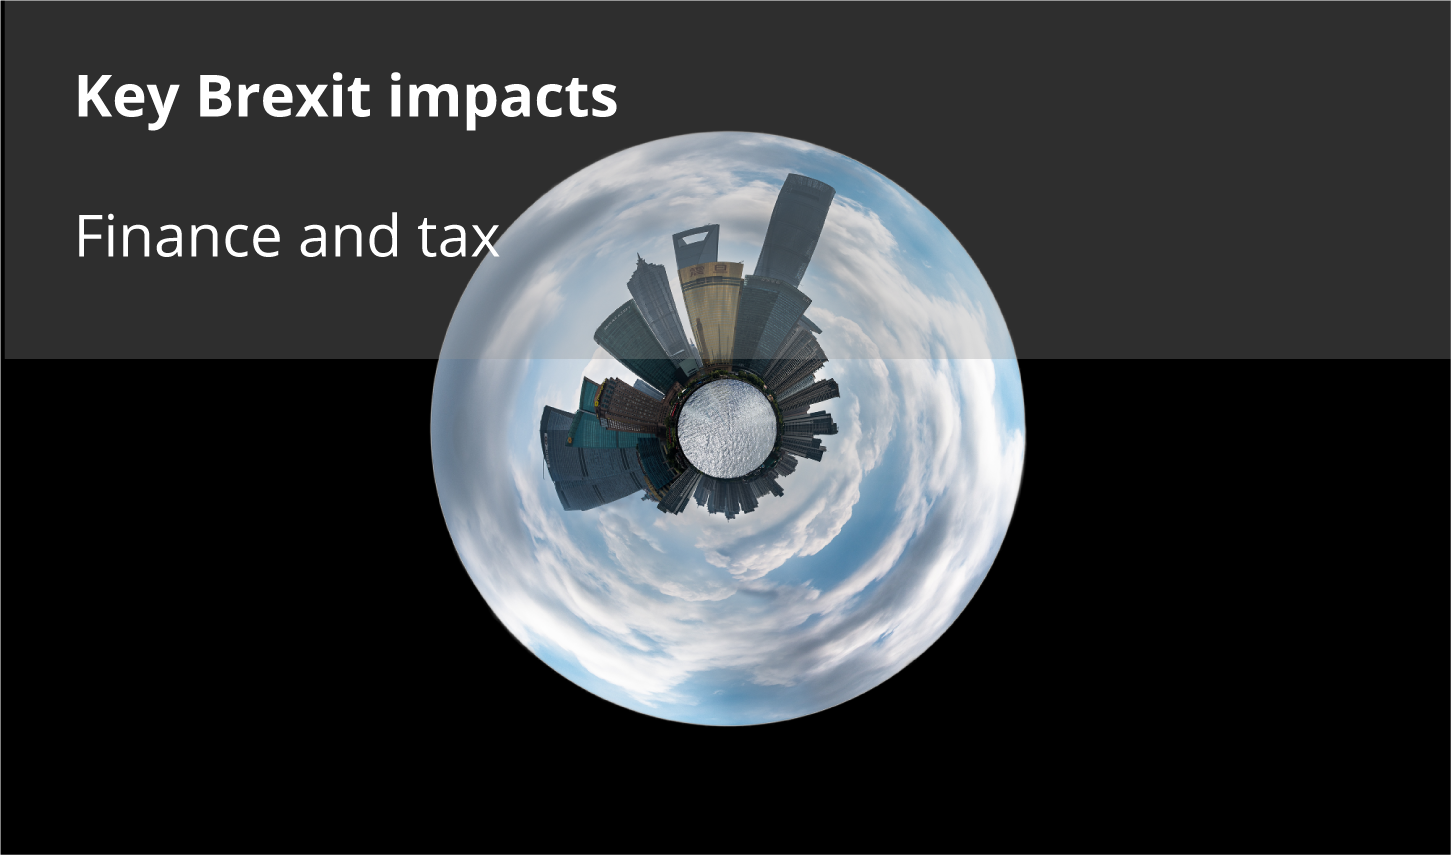 Key Brexit impacts: Finance and tax